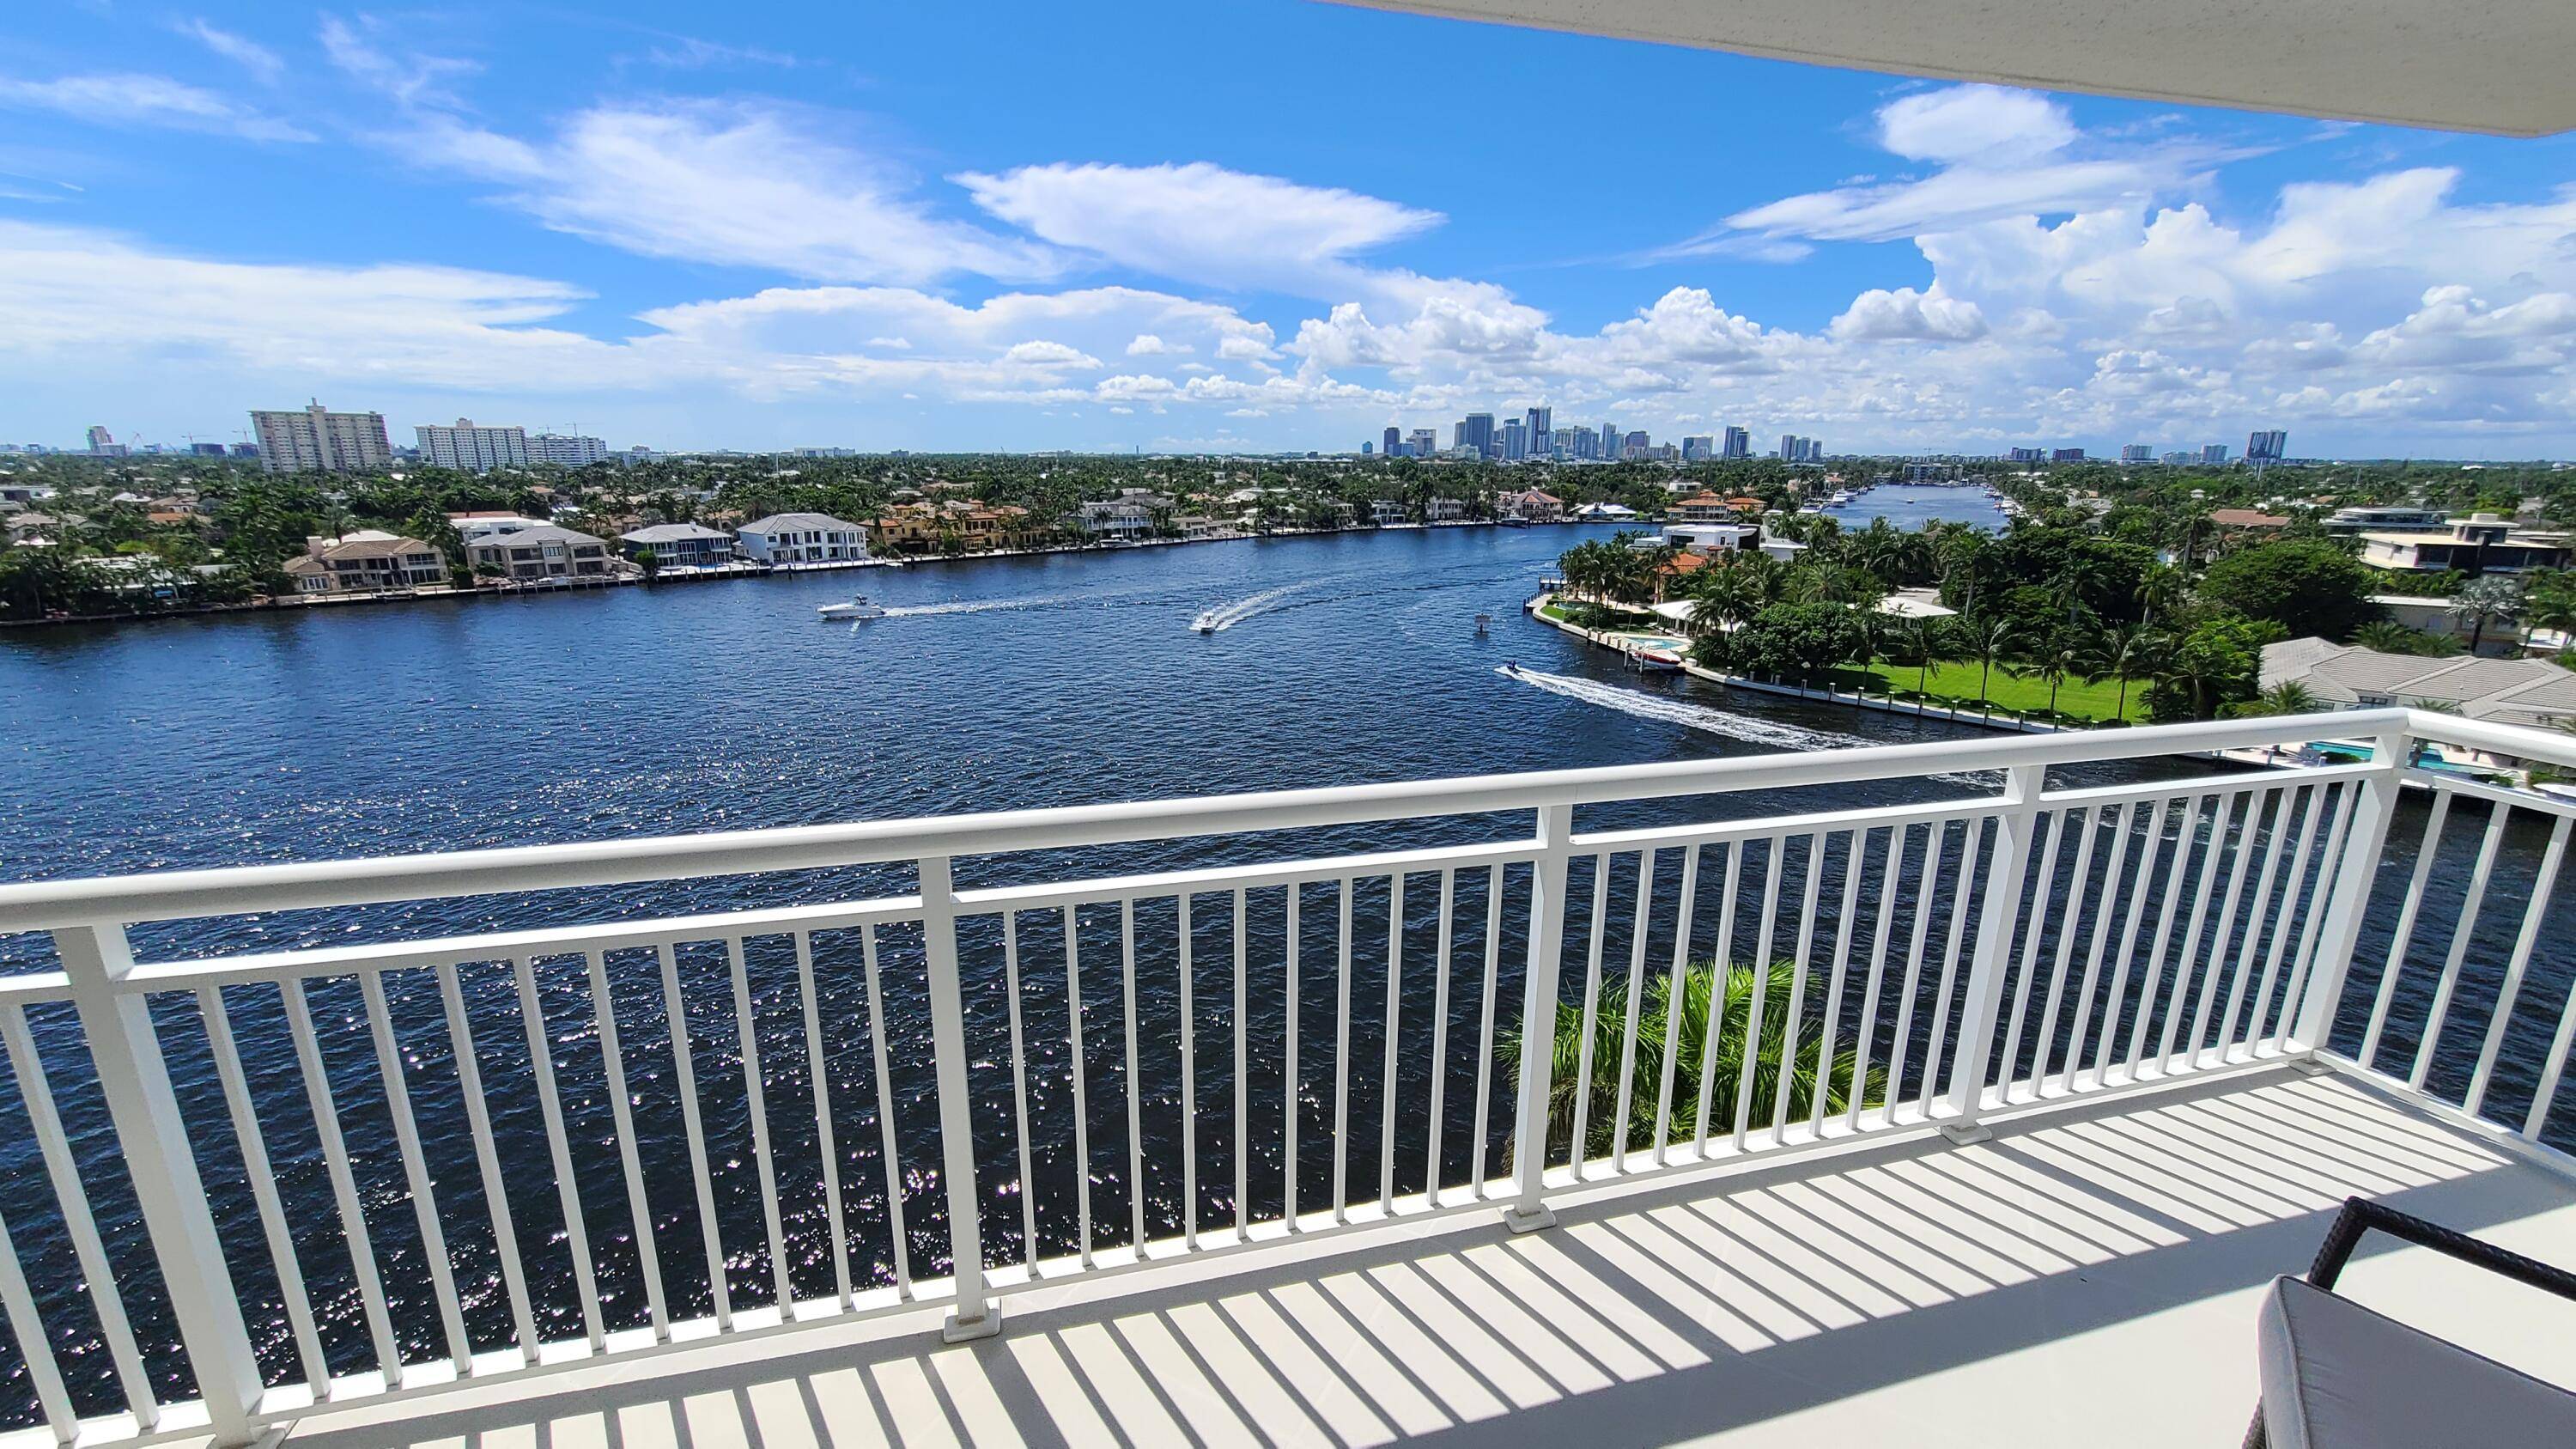 Imagine waking up to the gentle sway of palm trees and the shimmering blue waters of the Intracoastal Waterway or the ocean right outside your window.